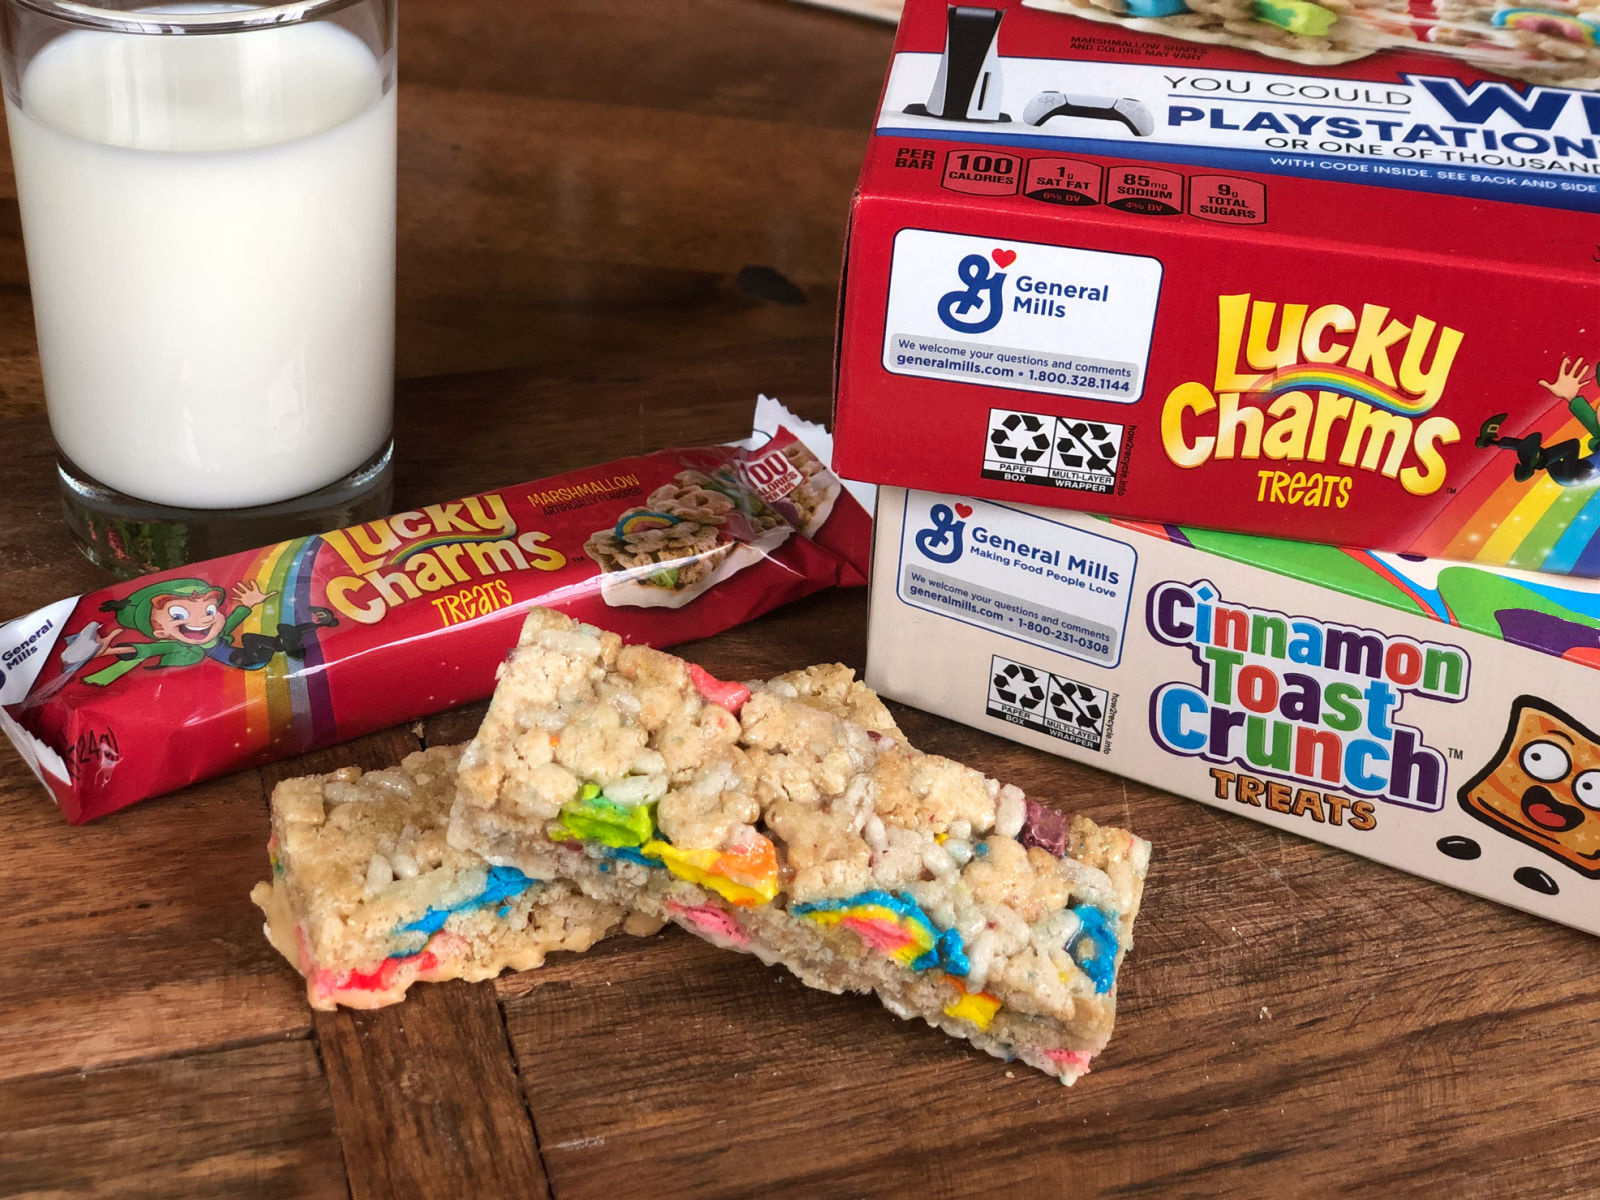 Big Boxes Of General Mills Cereal Bars As Low As $5.24 At Kroger – Plus Cheap Chex Mix Bars Too!